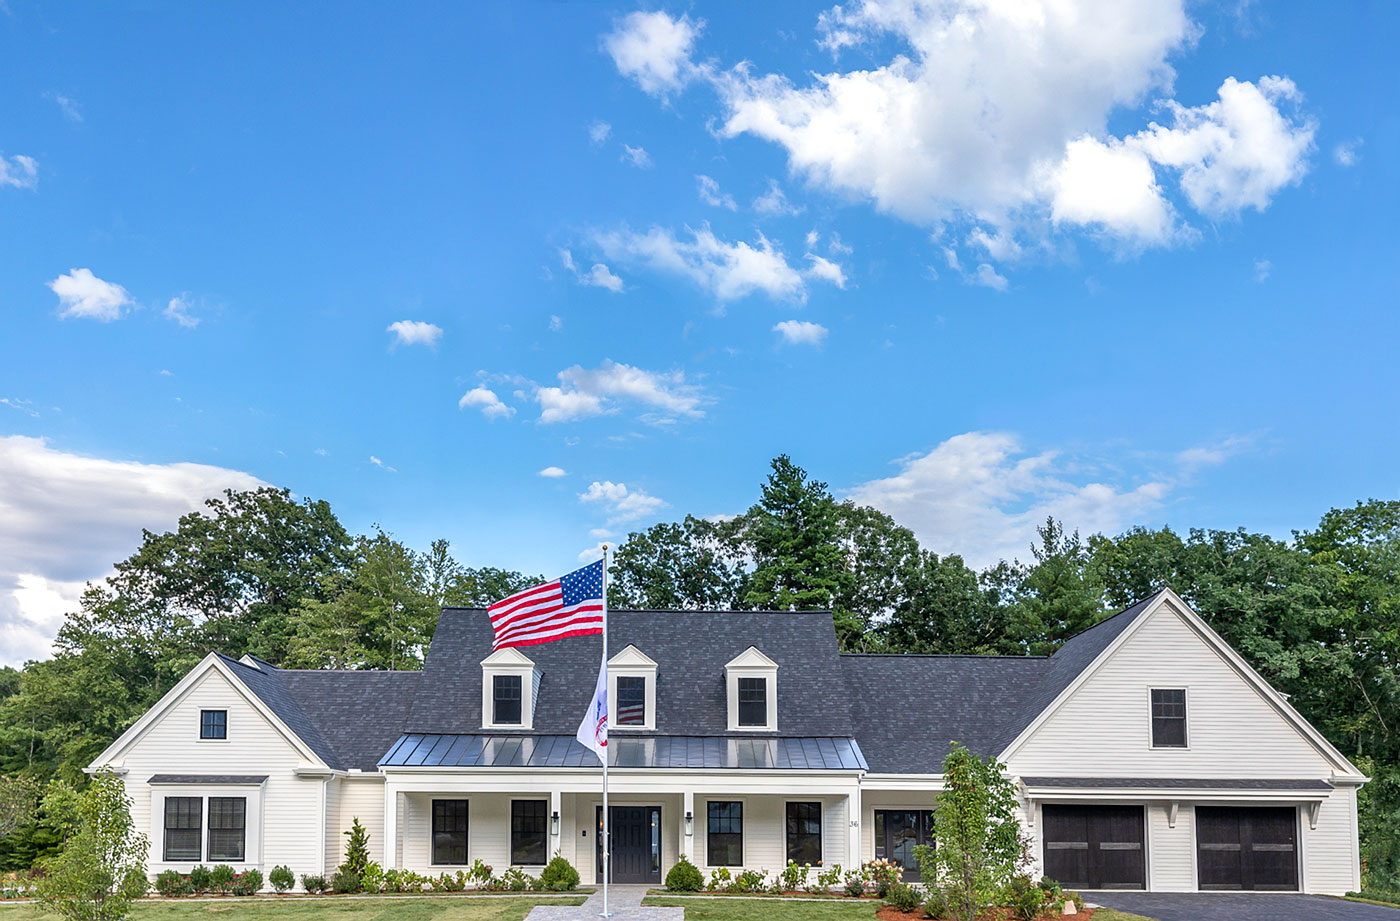 A specially adapted smart home, through the R.I.S.E. program at the Gary Sinise Foundation